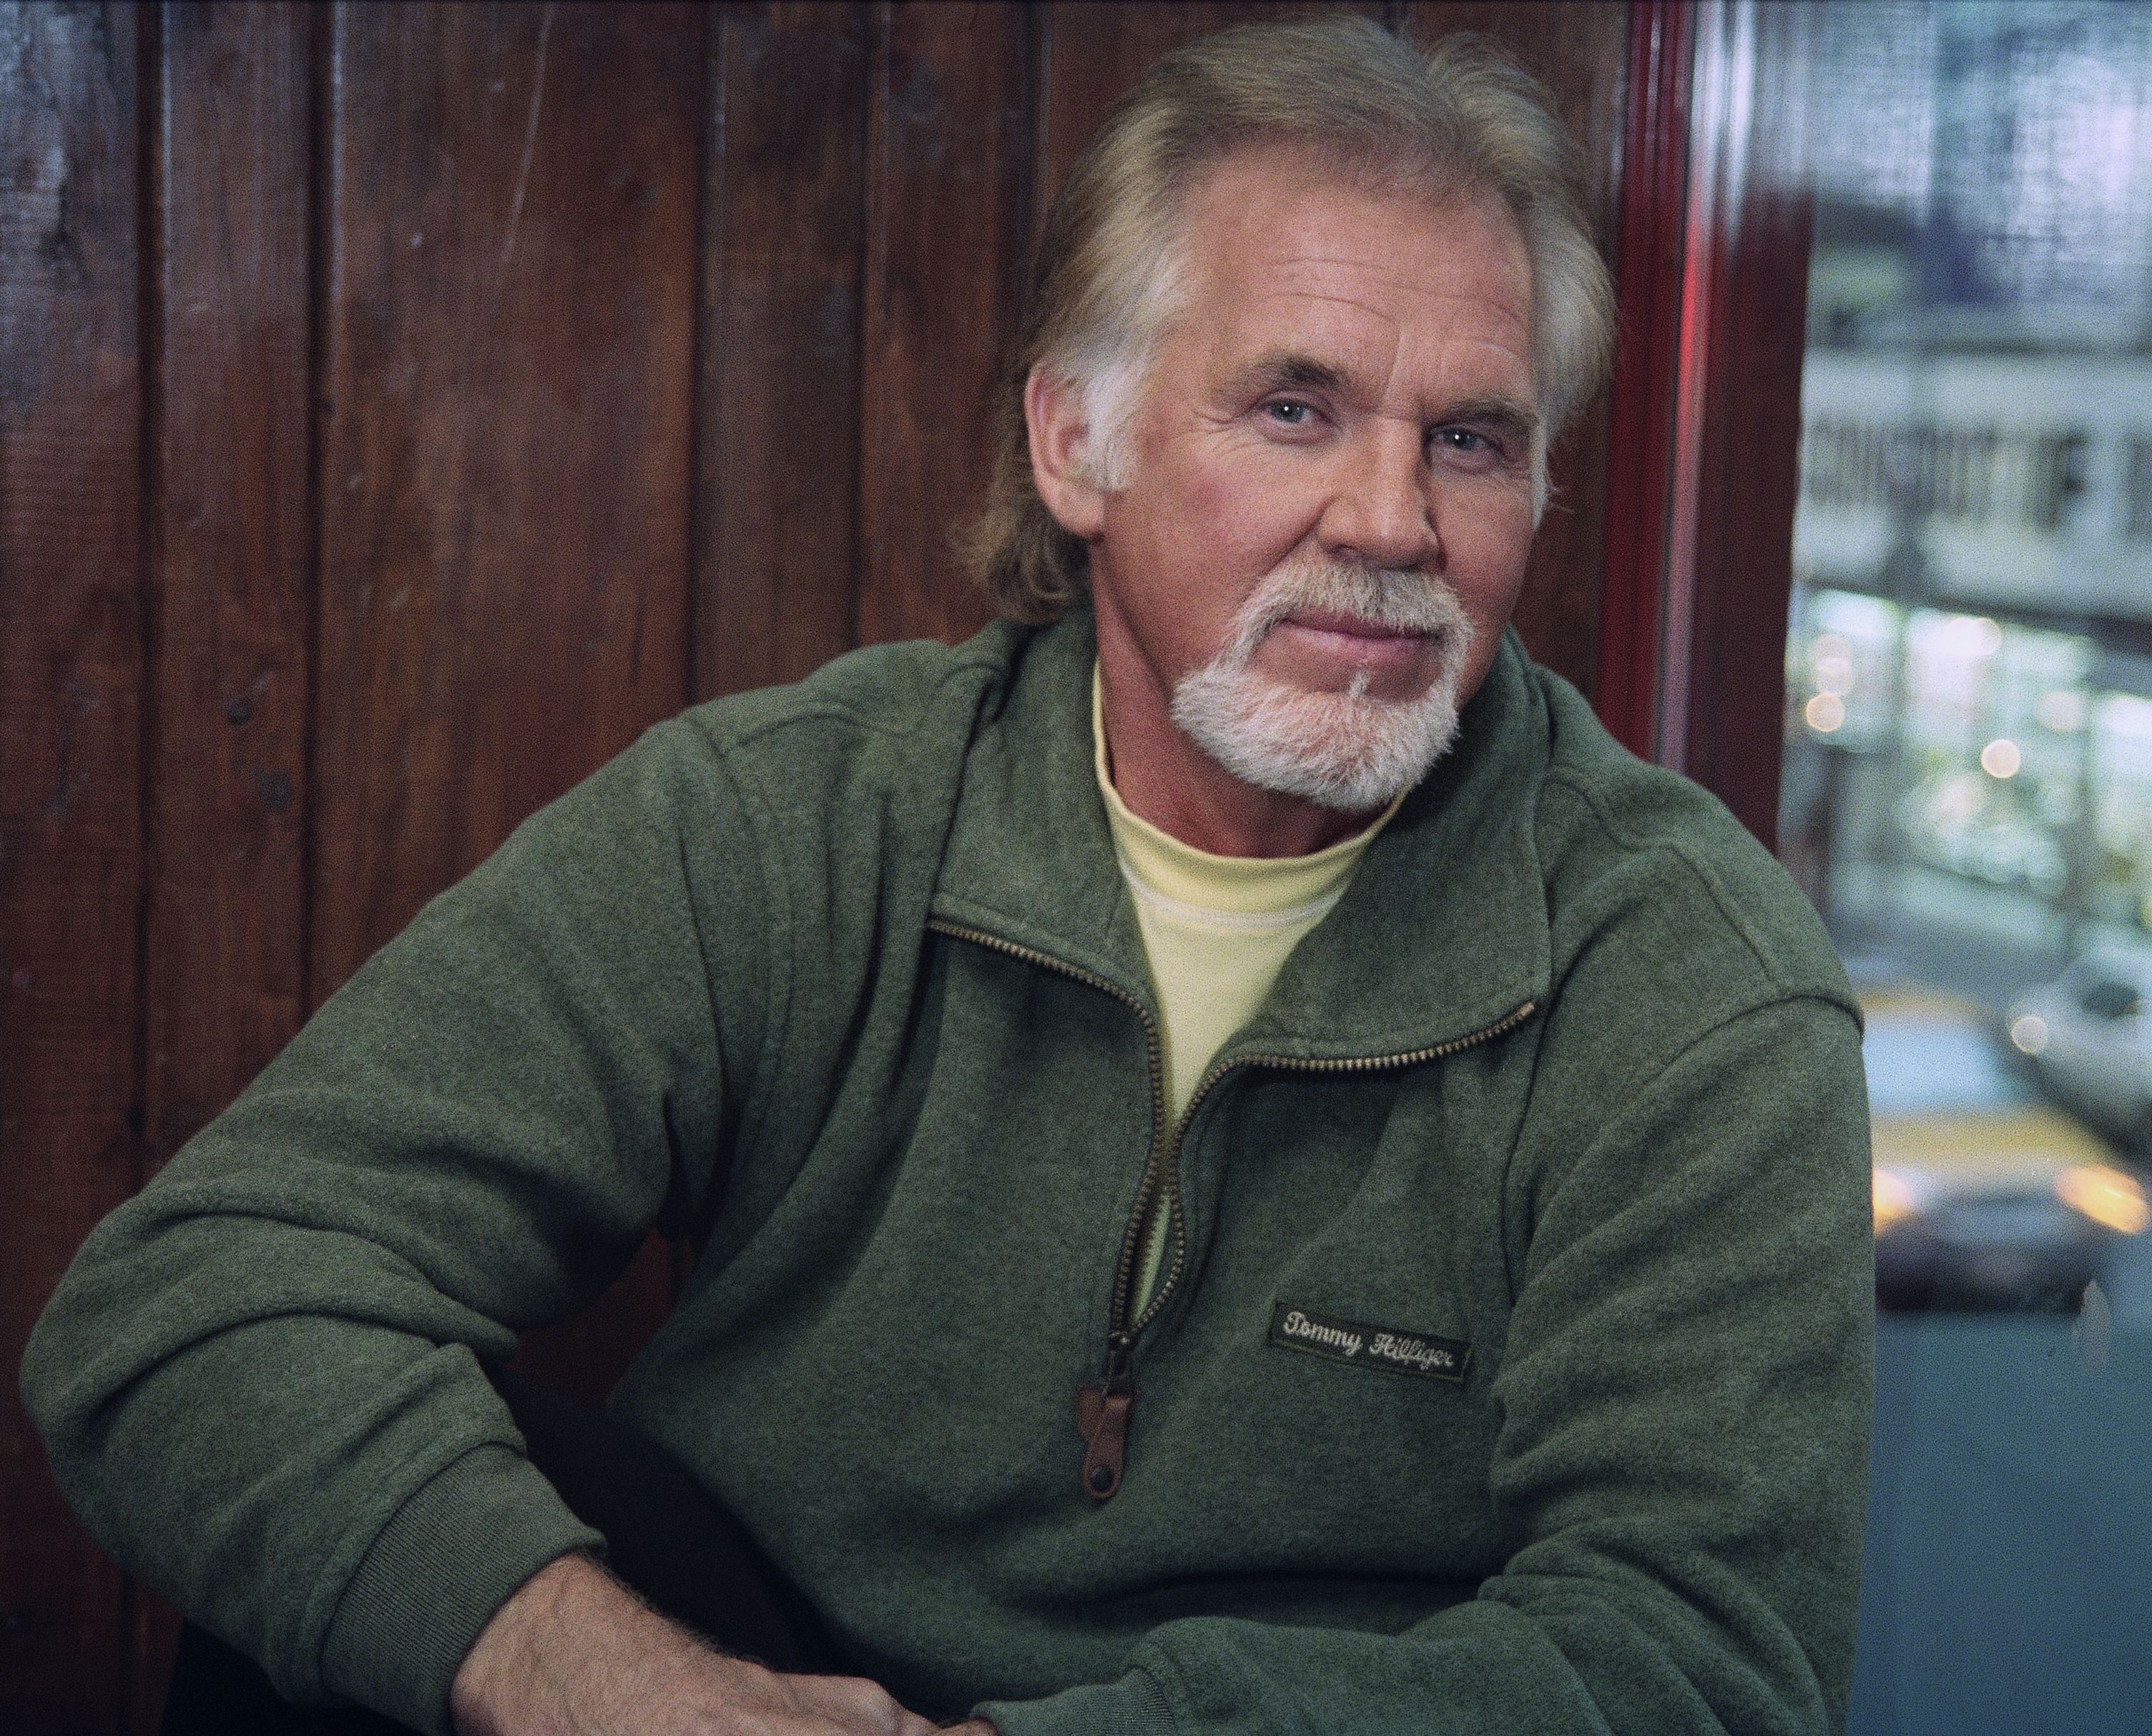 pictures of kenny rogers through the years